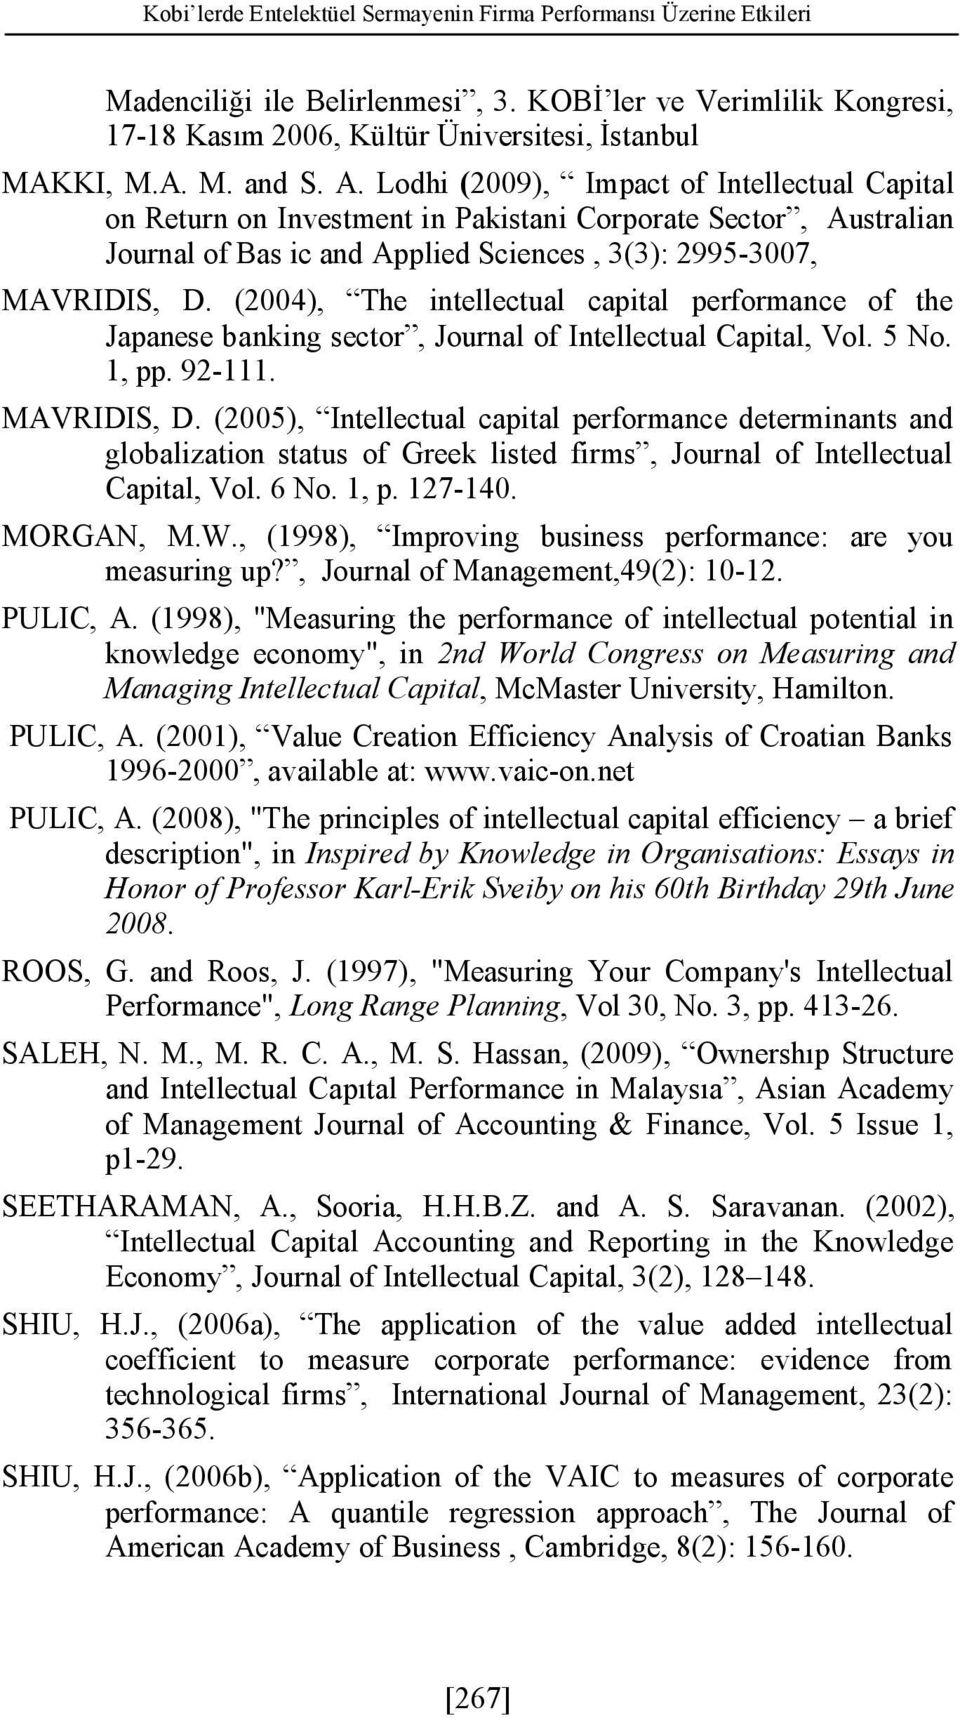 (2004), The intellectual capital performance of the Japanese banking sector, Journal of Intellectual Capital, Vol. 5 No. 1, pp. 92-111. MAVRIDIS, D.